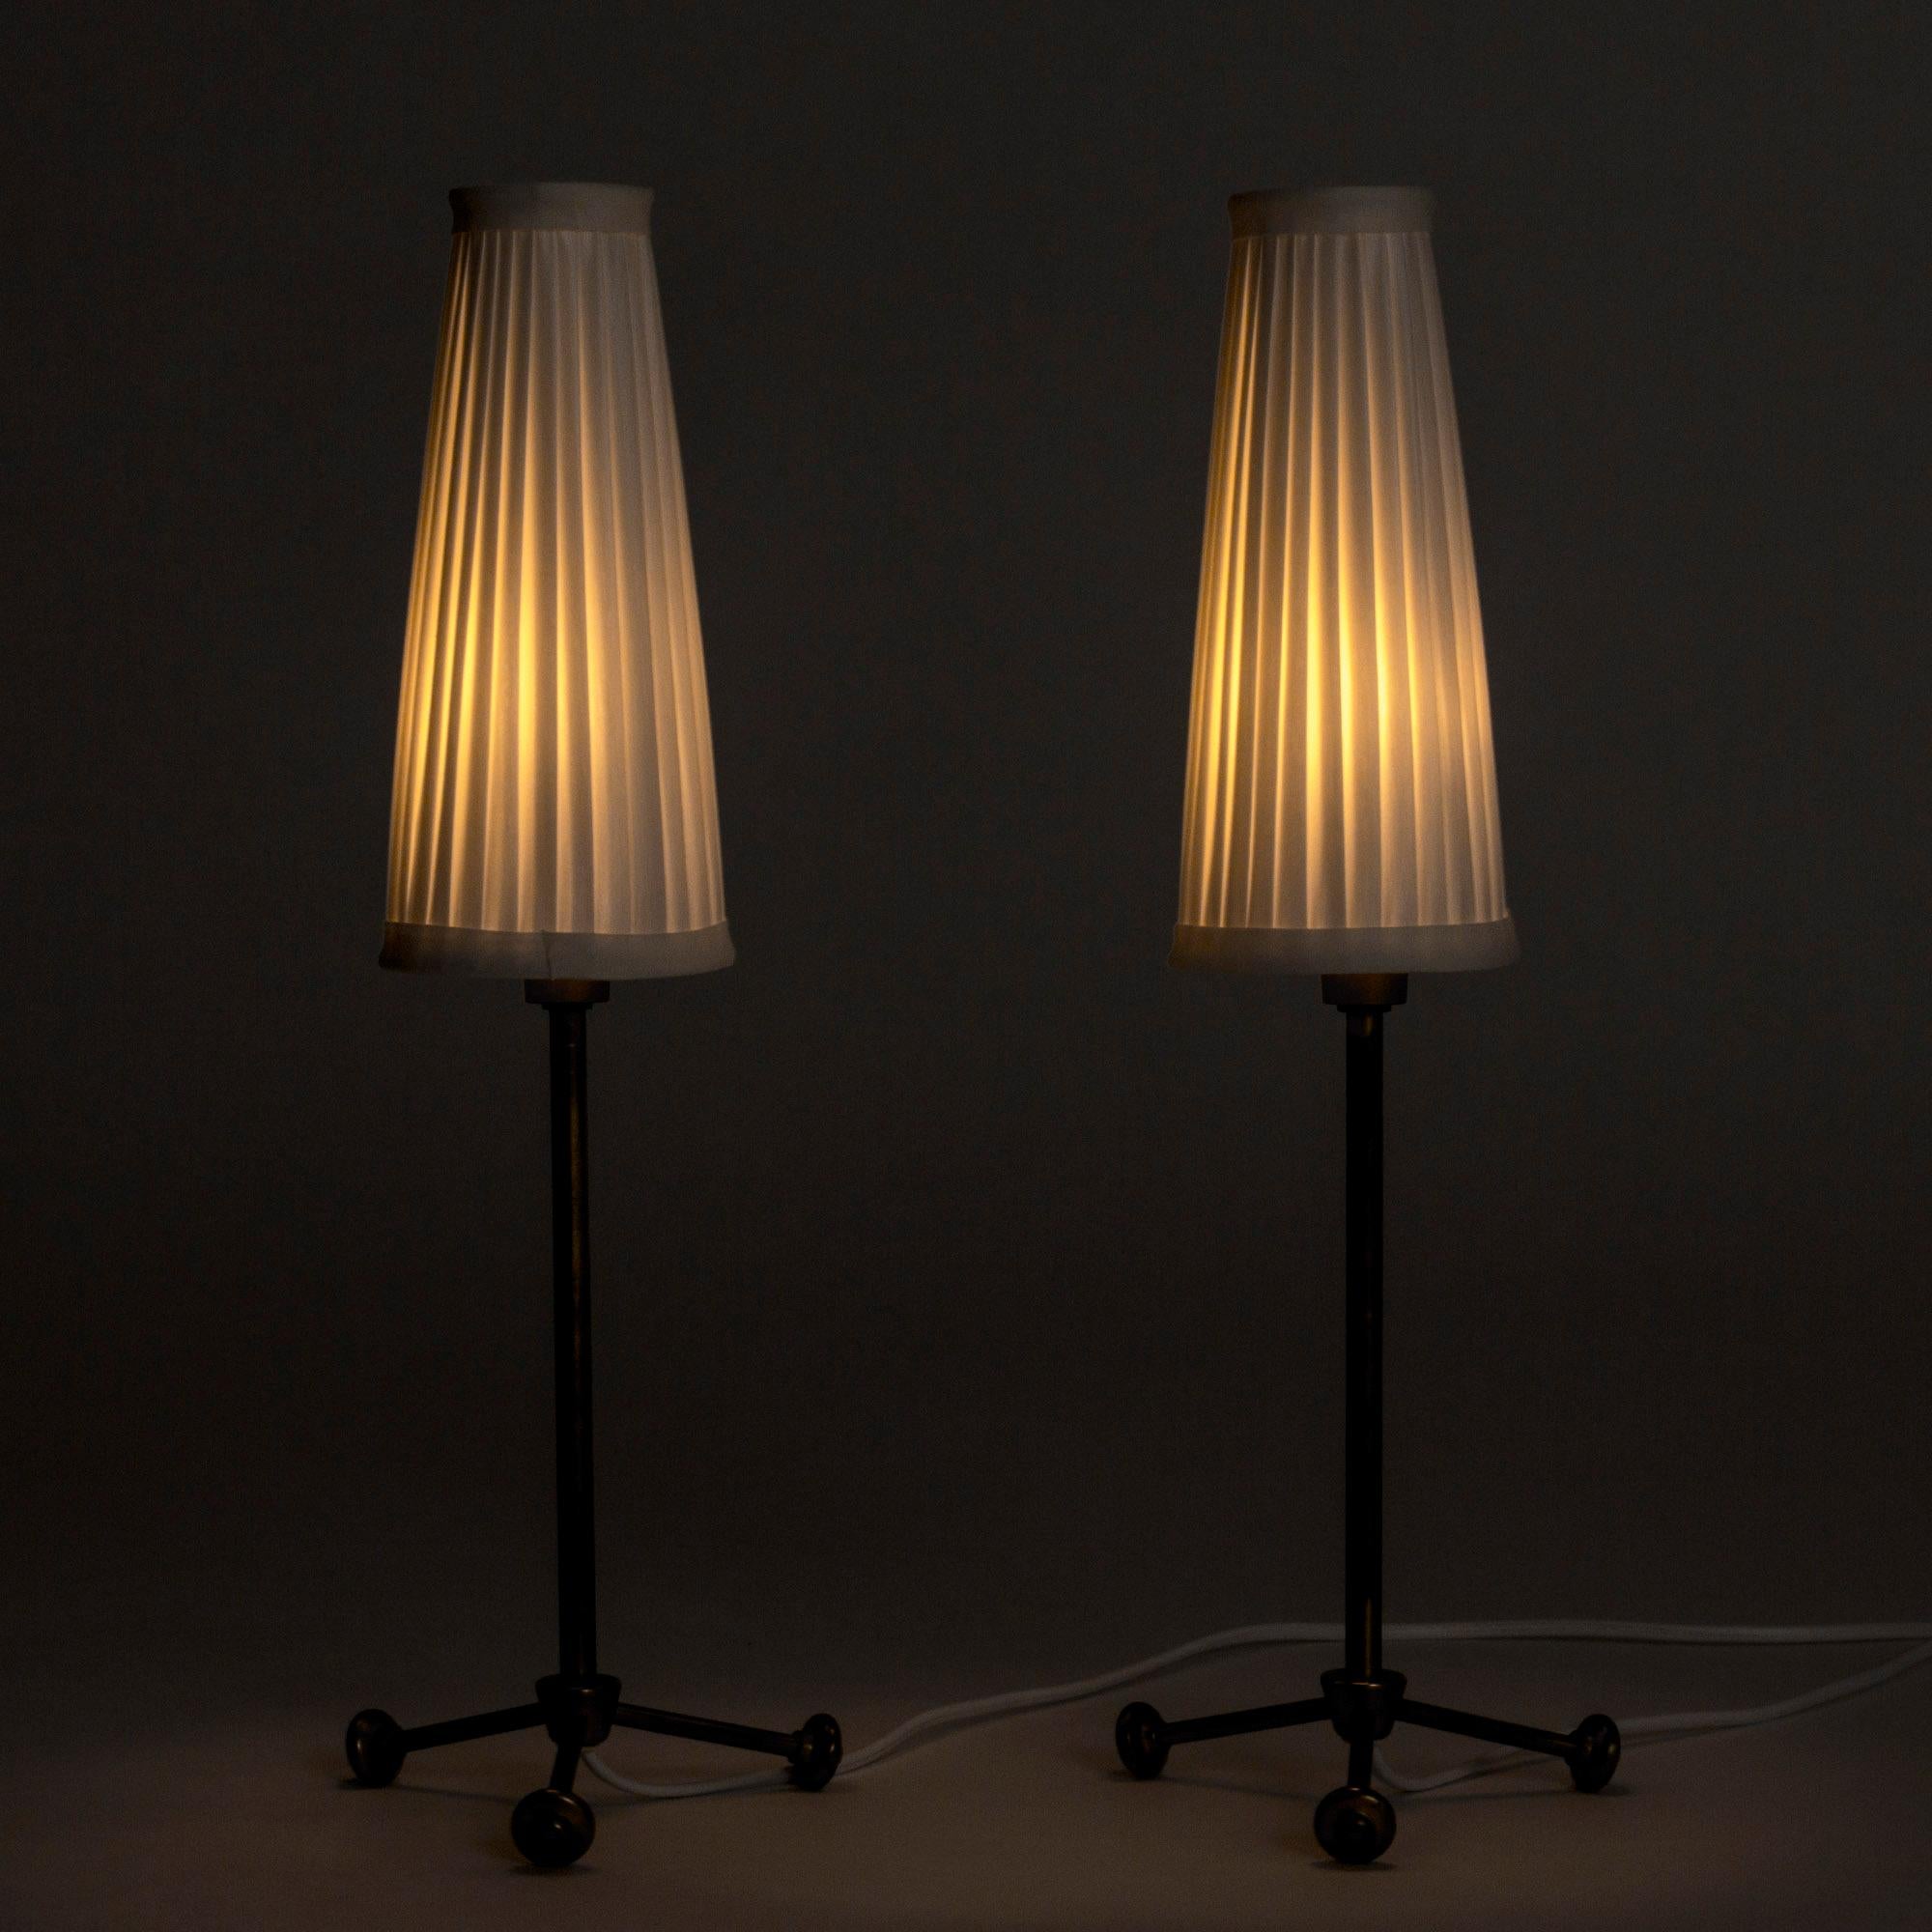 Pair of lovely table lamps by Hans Bergström, made from brass with tall, slender lamp shades. Feet with spheres at the ends.